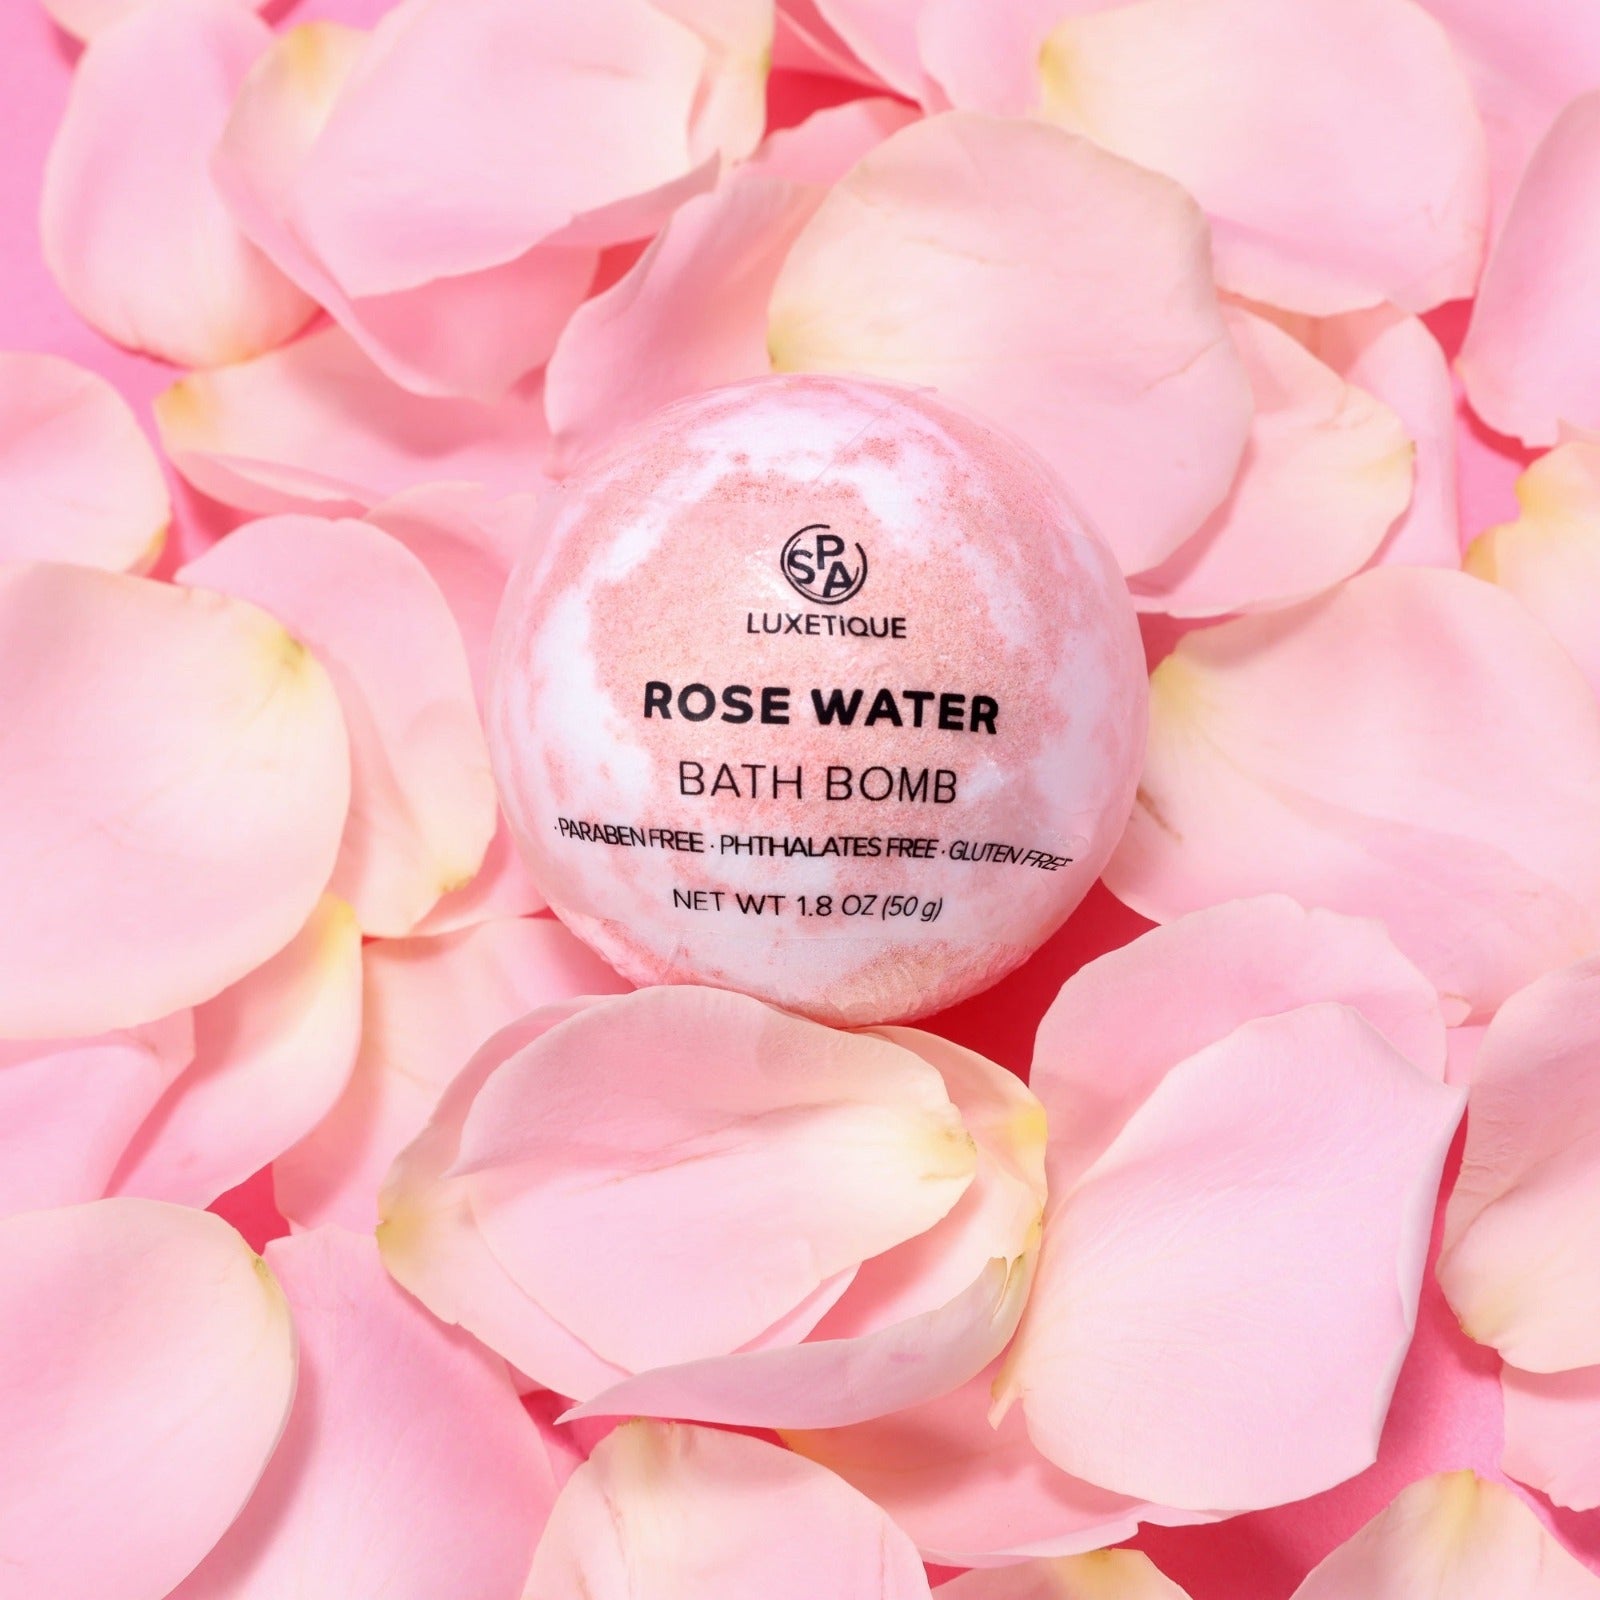 8pcs Gifts Rose Water Gift Set. Transform your bath into a luxurious spa experience with our Rose Oil Bath Bomb. Infused with moisturizing Coconut Oil, Vitamin E, and Shea Butter, this bath bomb will leave your skin hydrated, soft, and glowing. Soothing Rose Oil will provide a calming aroma and enhance your skin's natural radiance. Indulge in ultimate relaxation and rejuvenation at home with our Rose Oil Bath Bomb.